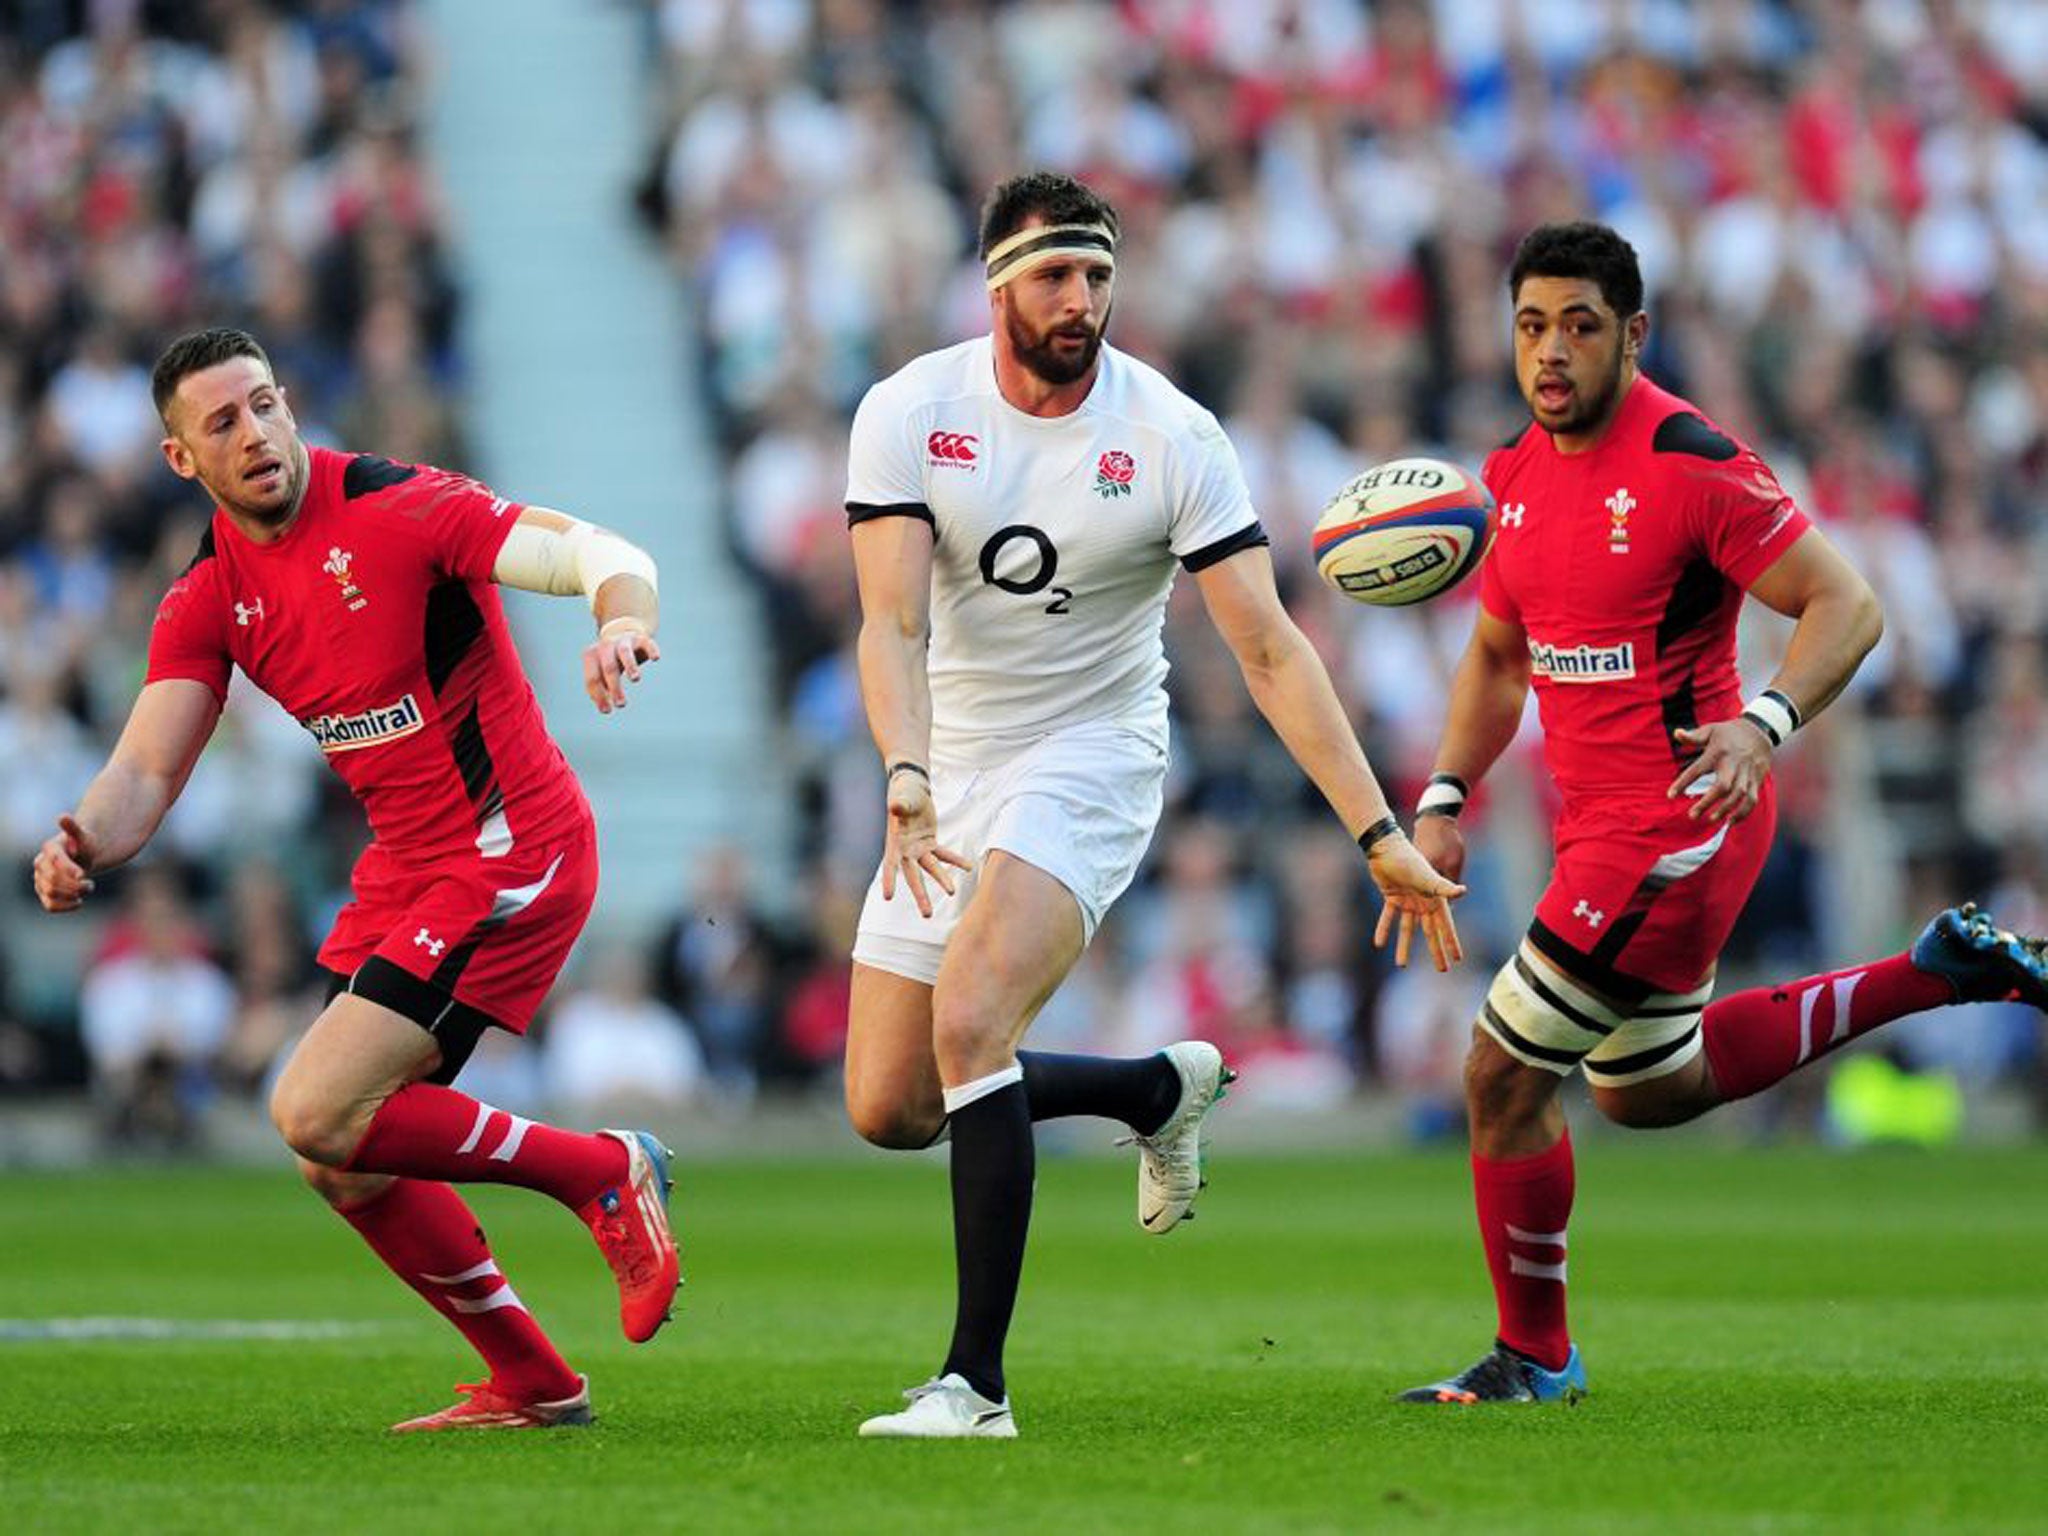 Tom Wood knows that Italy will be no pushovers in their own back yard in the Six Nations finale